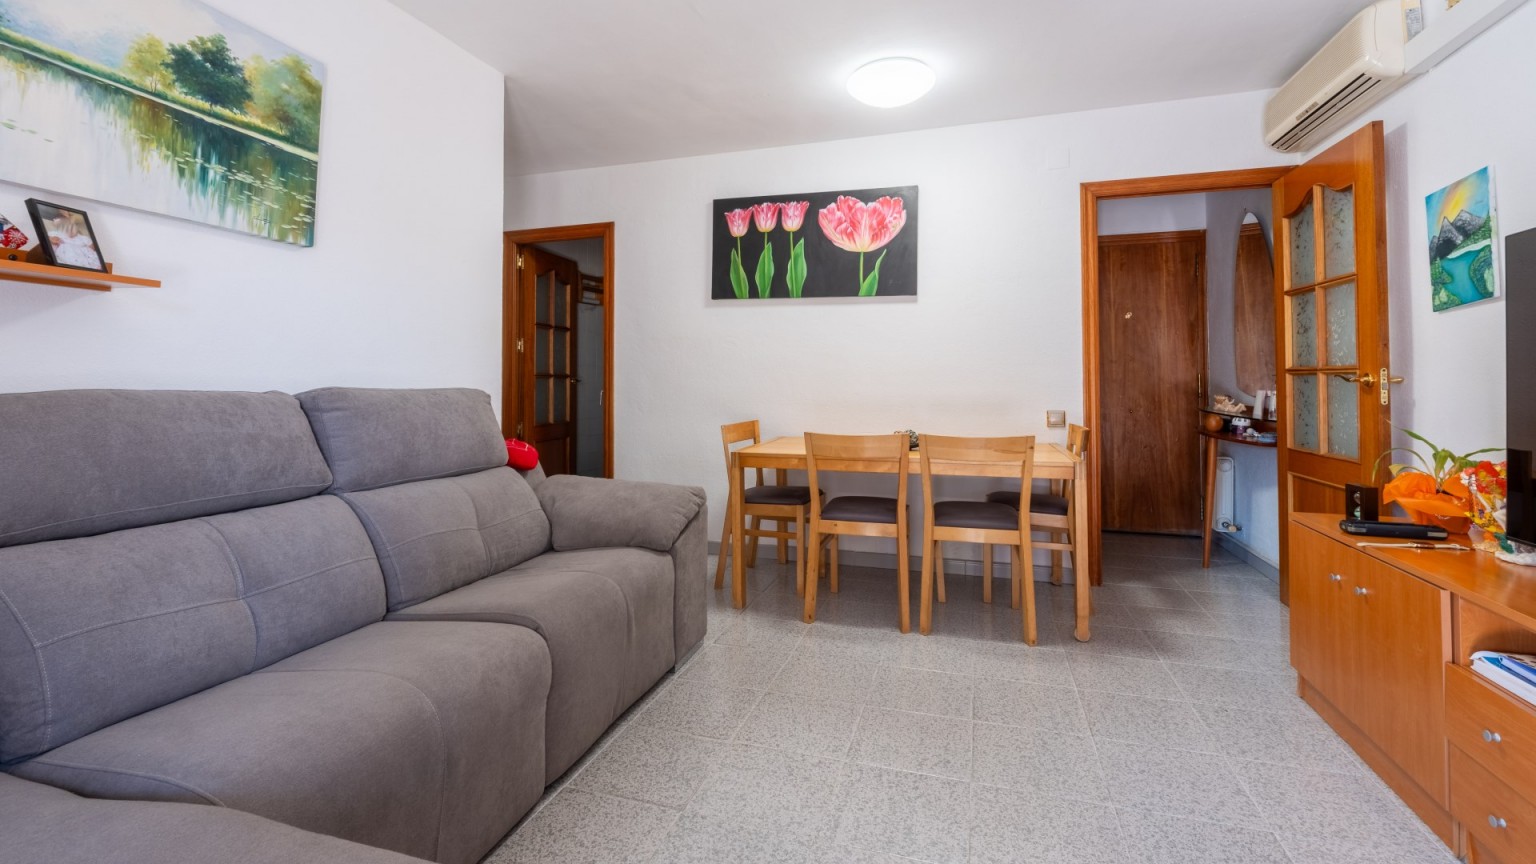 Ground floor with a spacious terrace in Girona.